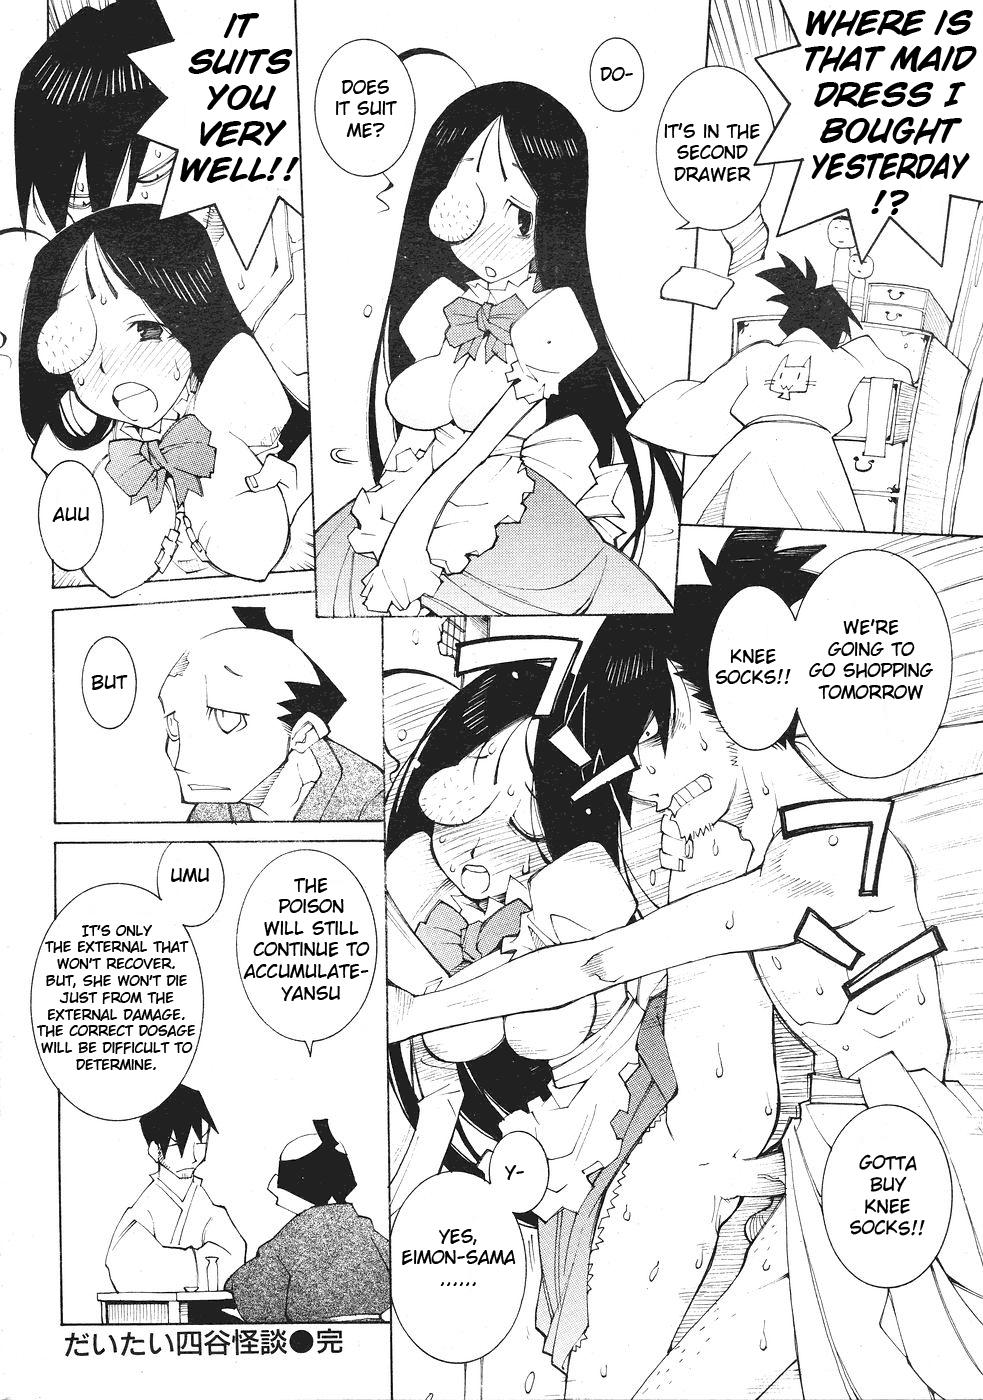 Jerking Off A Substitute Yotsuya Ghost Story Peituda - Page 4